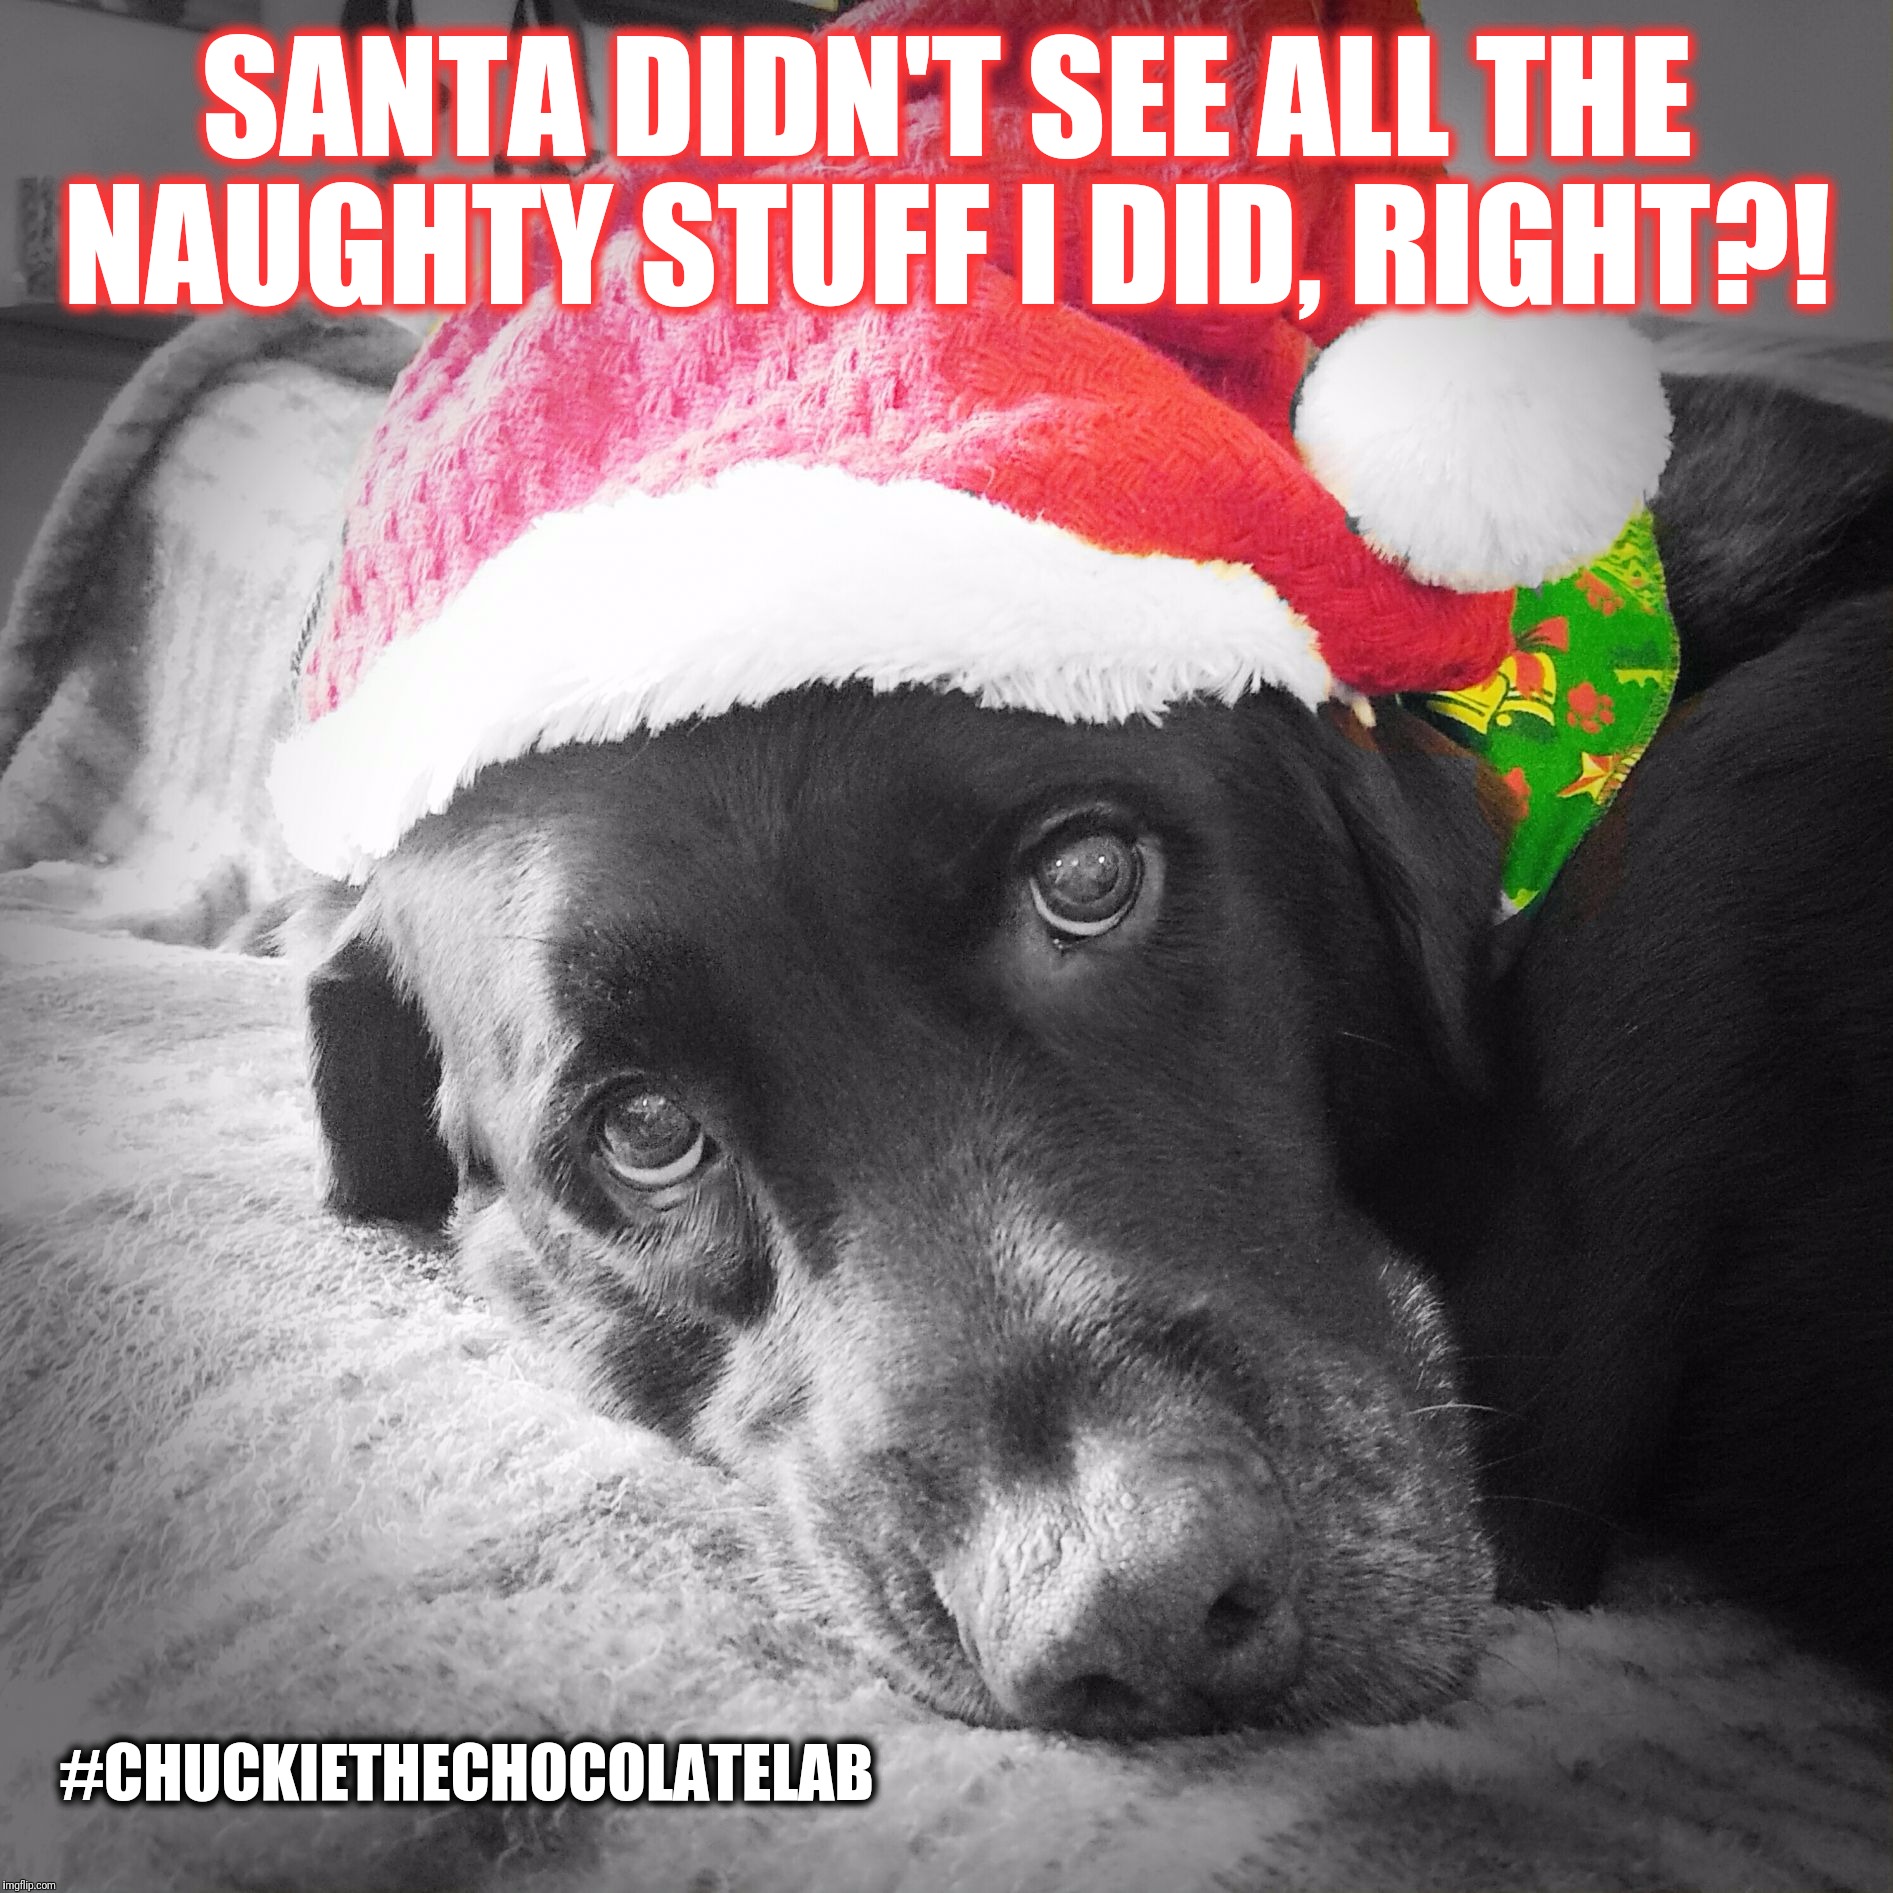 Santa didn't see all the naughty stuff I did, right?  | SANTA DIDN'T SEE ALL THE NAUGHTY STUFF I DID, RIGHT?! #CHUCKIETHECHOCOLATELAB | image tagged in chuckie the chocolate lab,santa,naughty list,christmas,funny,dogs | made w/ Imgflip meme maker